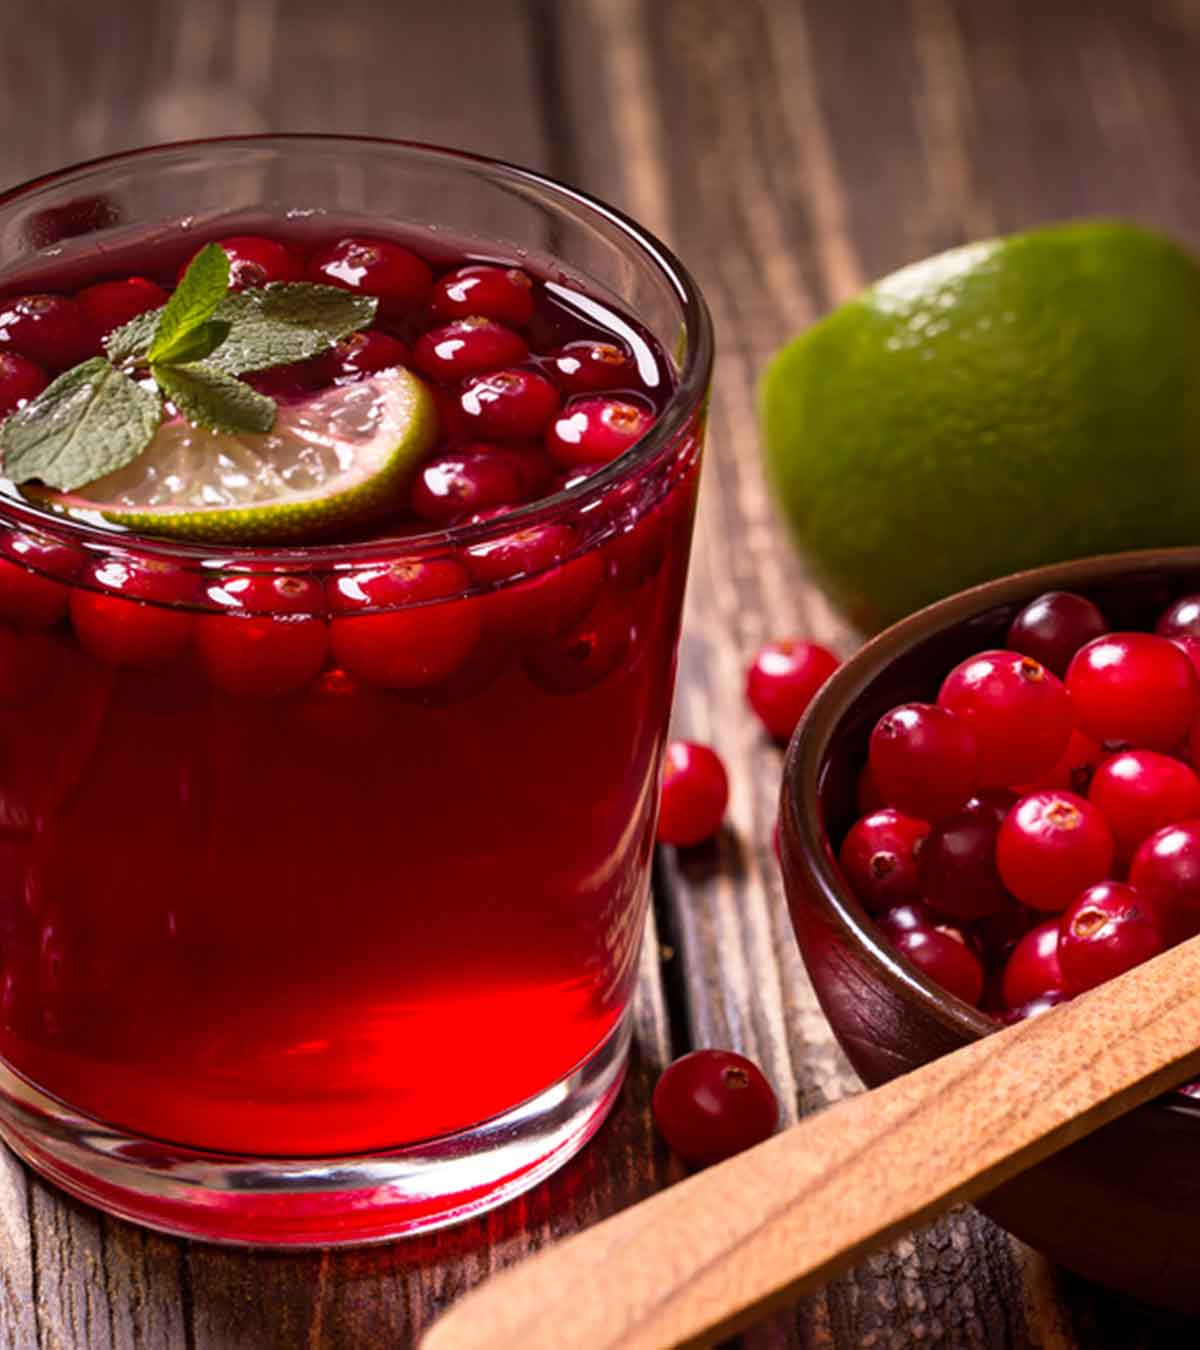 Is It Safe To Drink Cranberry Juice When Breastfeeding?